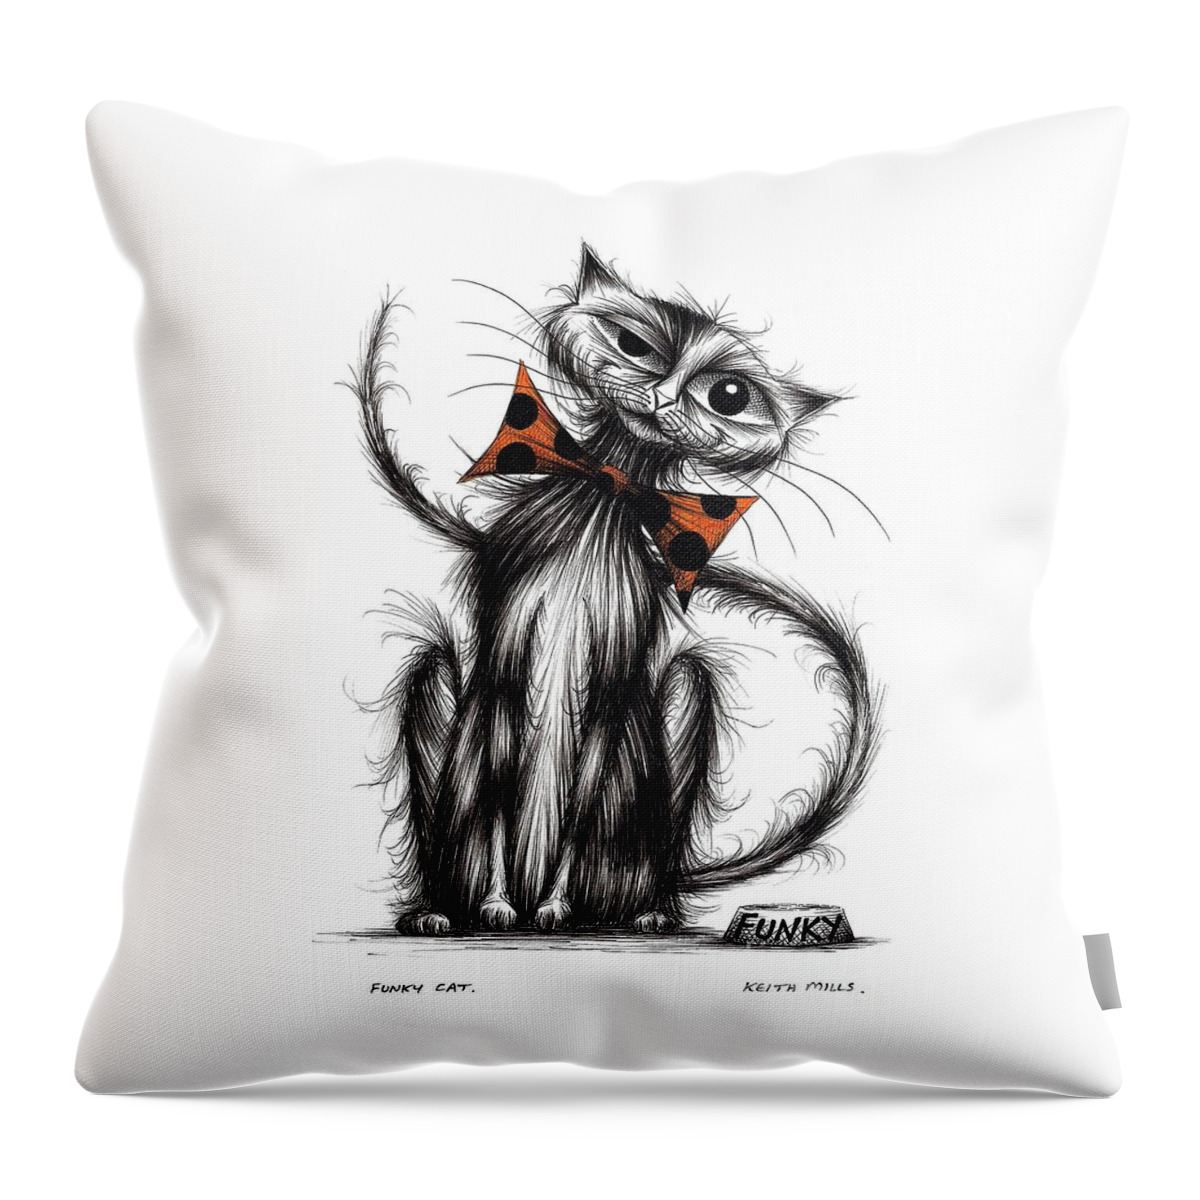 Funky Throw Pillow featuring the drawing Funky cat by Keith Mills